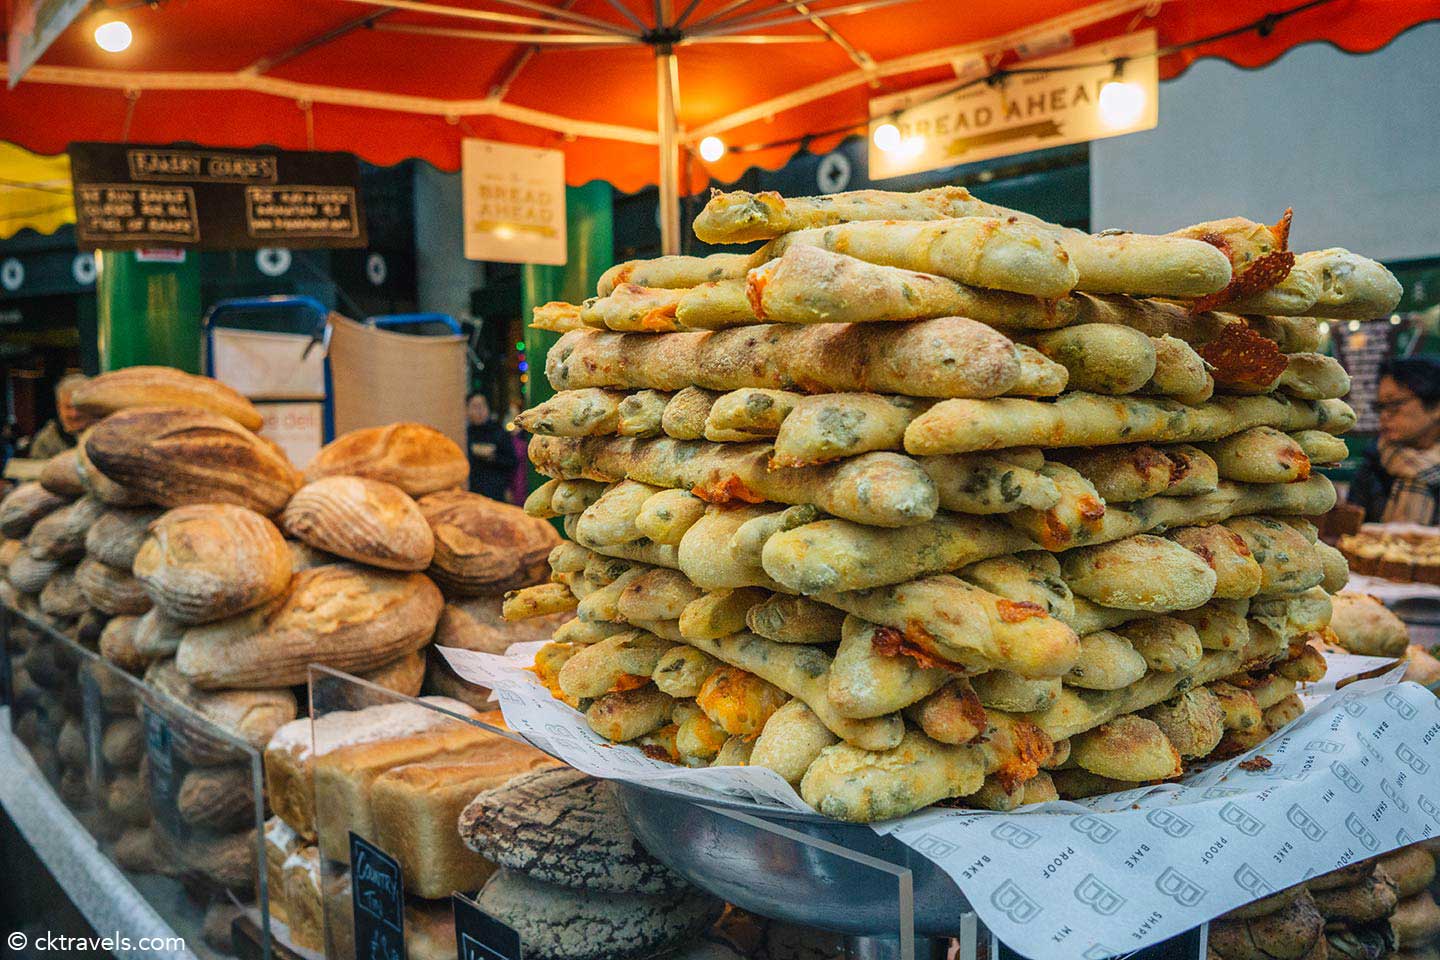 olive bread stall at Borough Market guide - London's most famous food market